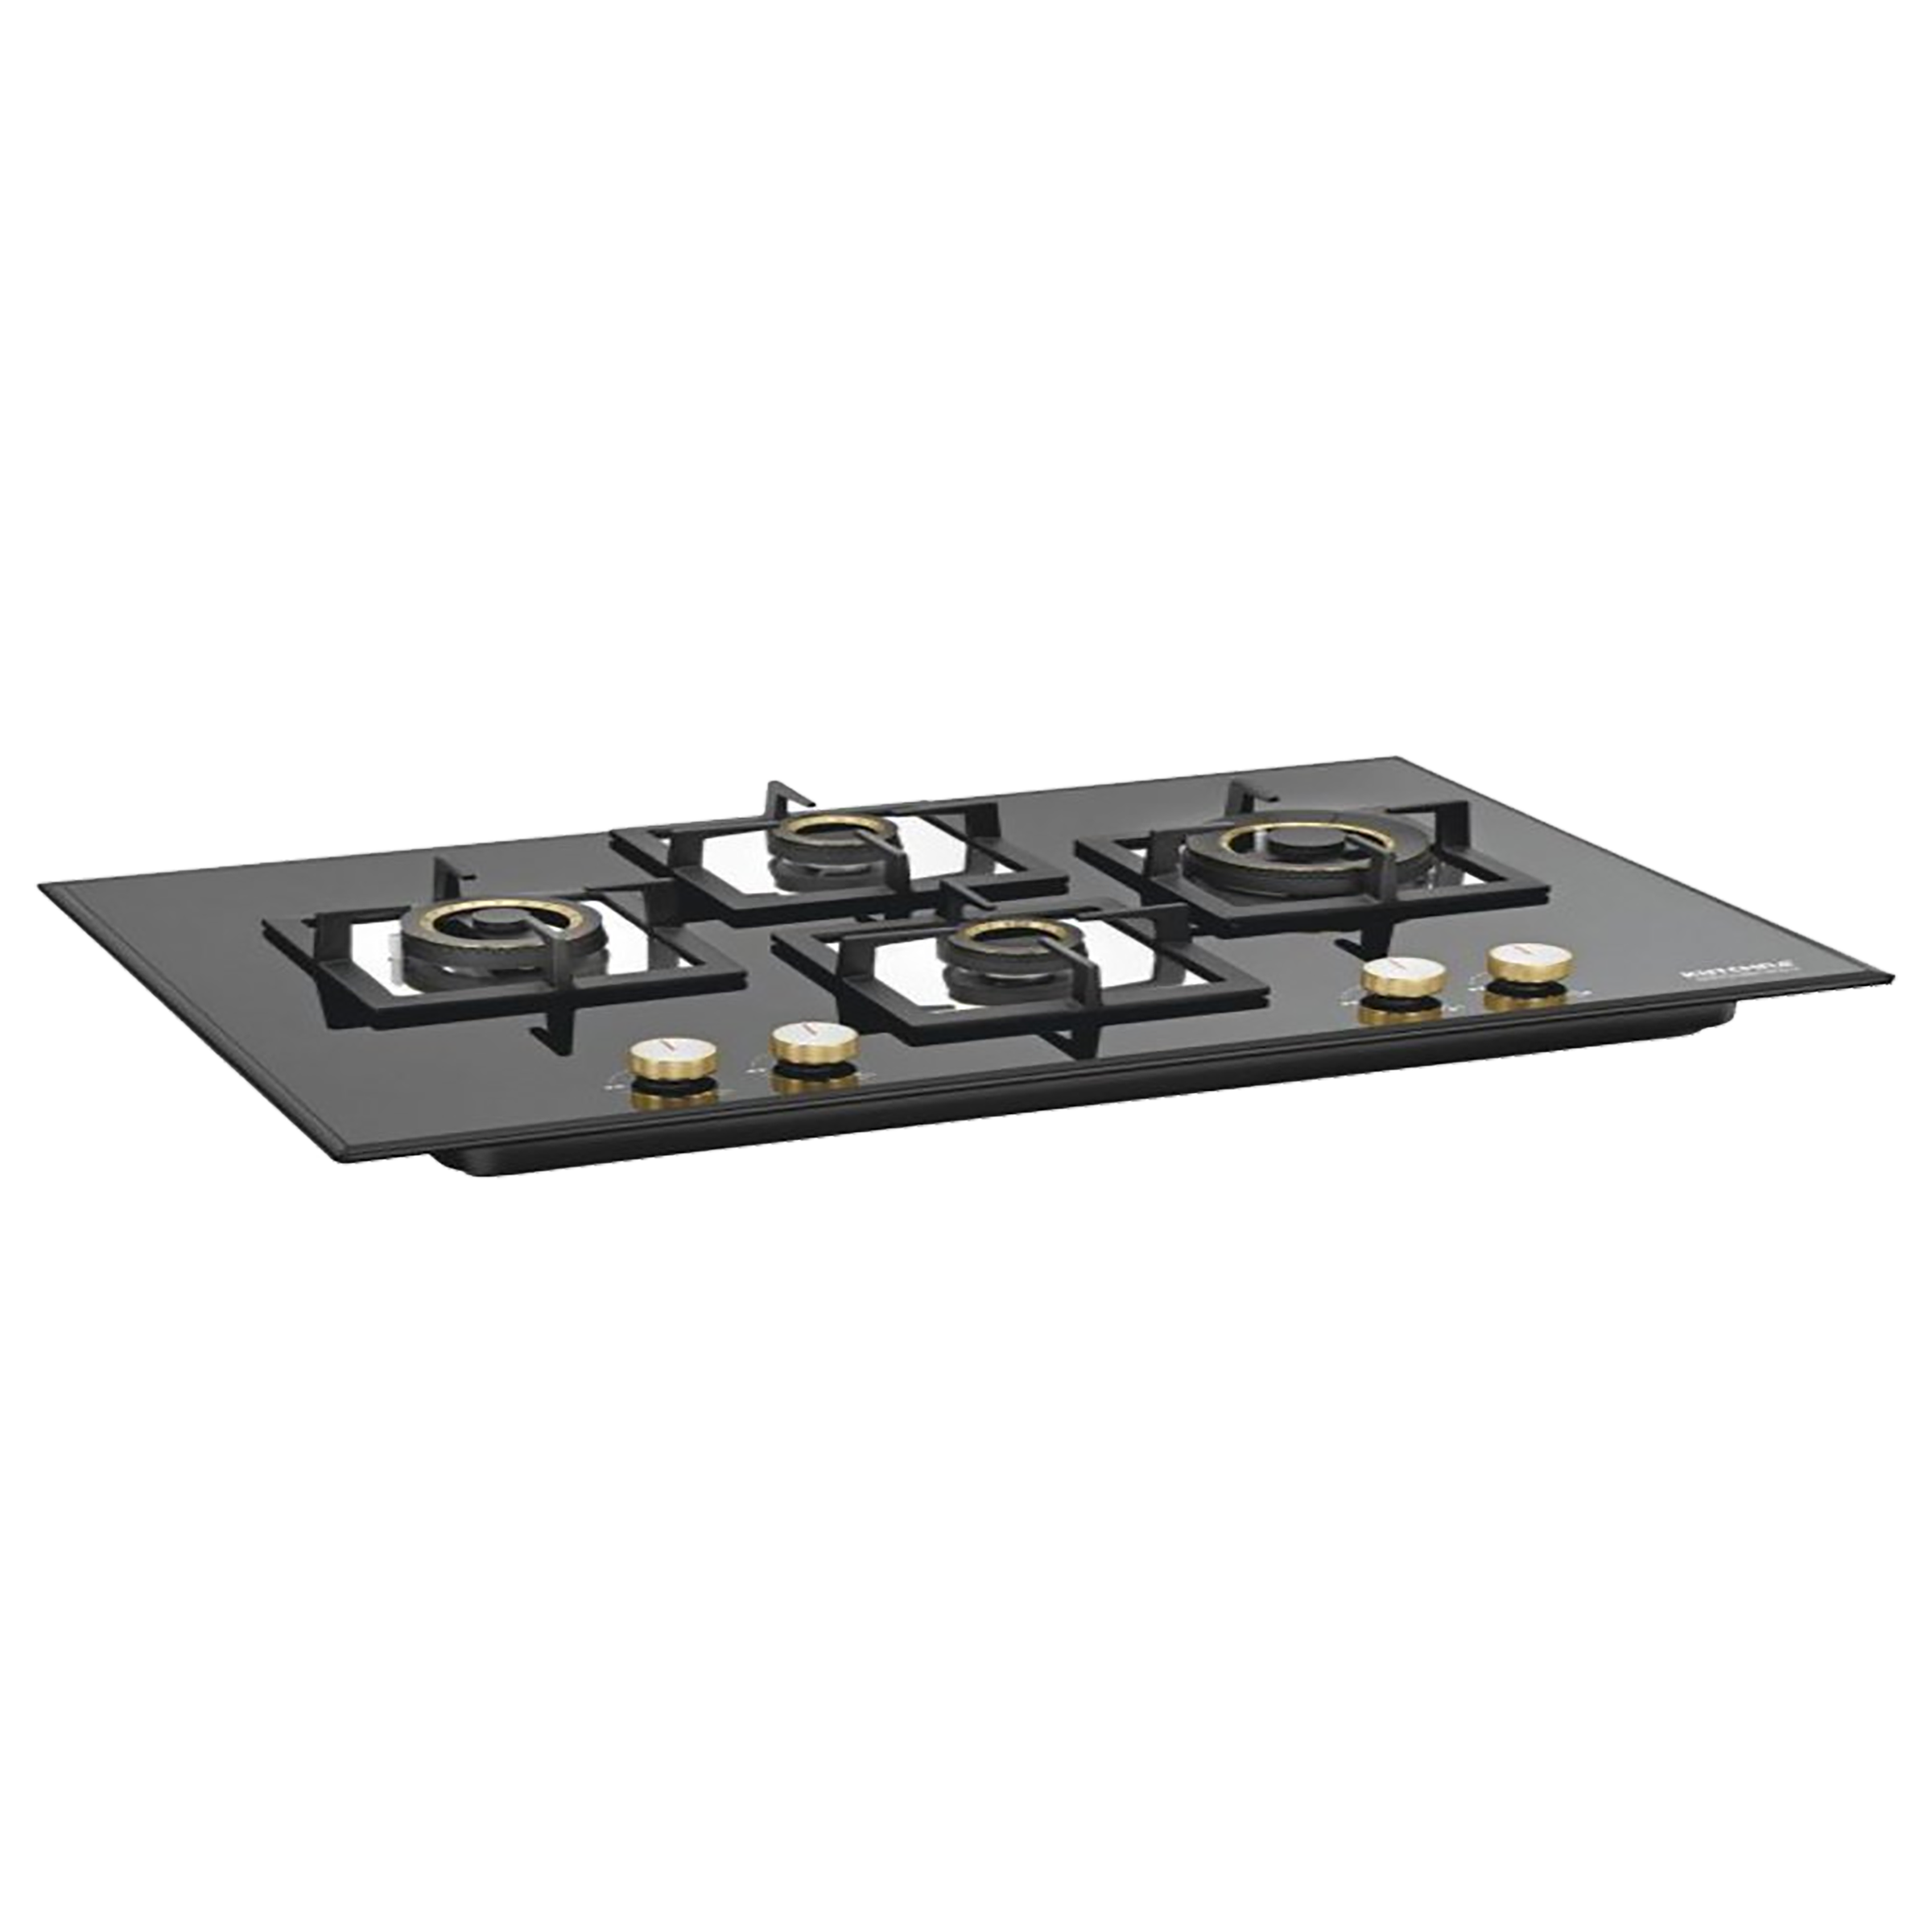 Kutchina Marica 4 Burner Tempered Glass Built-in Gas Stove (Aesthetic Designs, MARICA 4BS 90 DLX, Black)_1